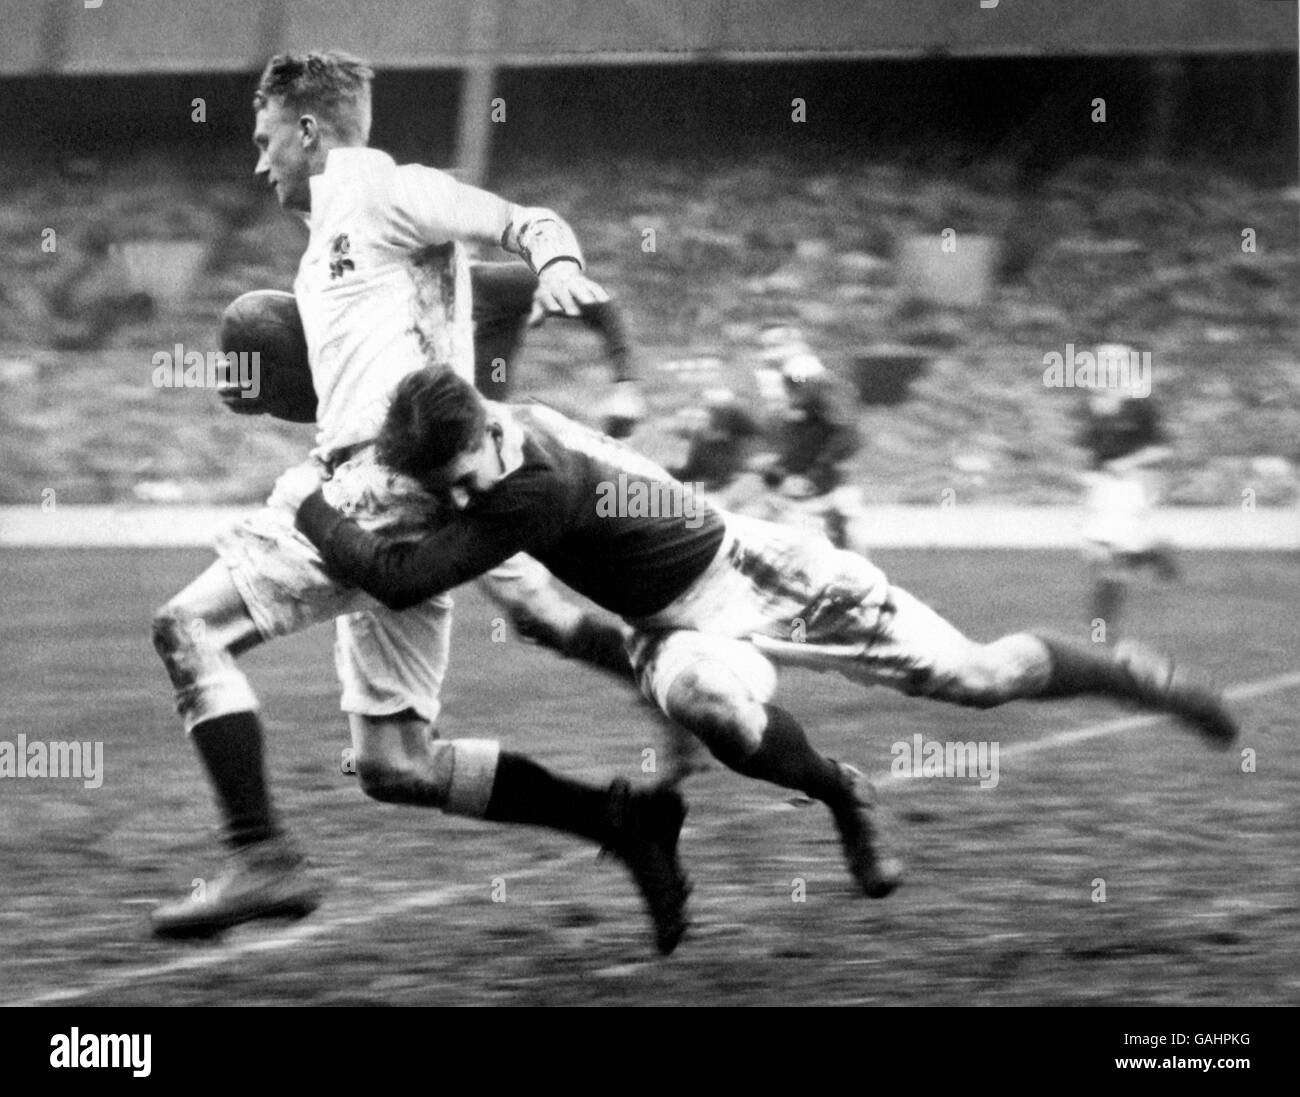 Scottish rugby Black and White Stock Photos & Images - Alamy